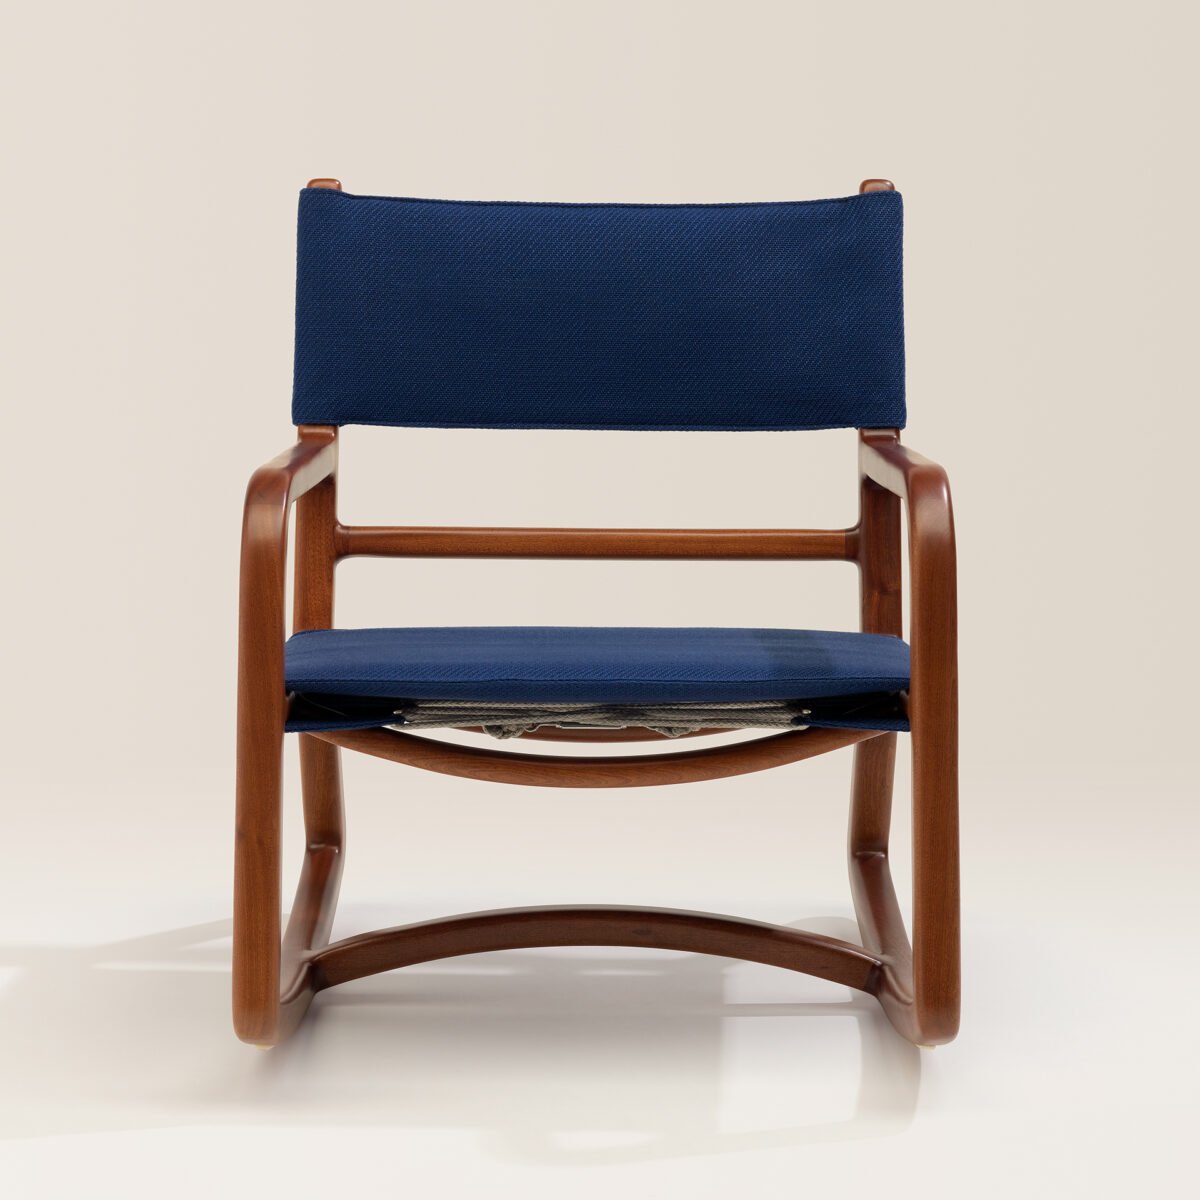 Loro Piana Interiors The Delight chairs by Exteta Rocking chair